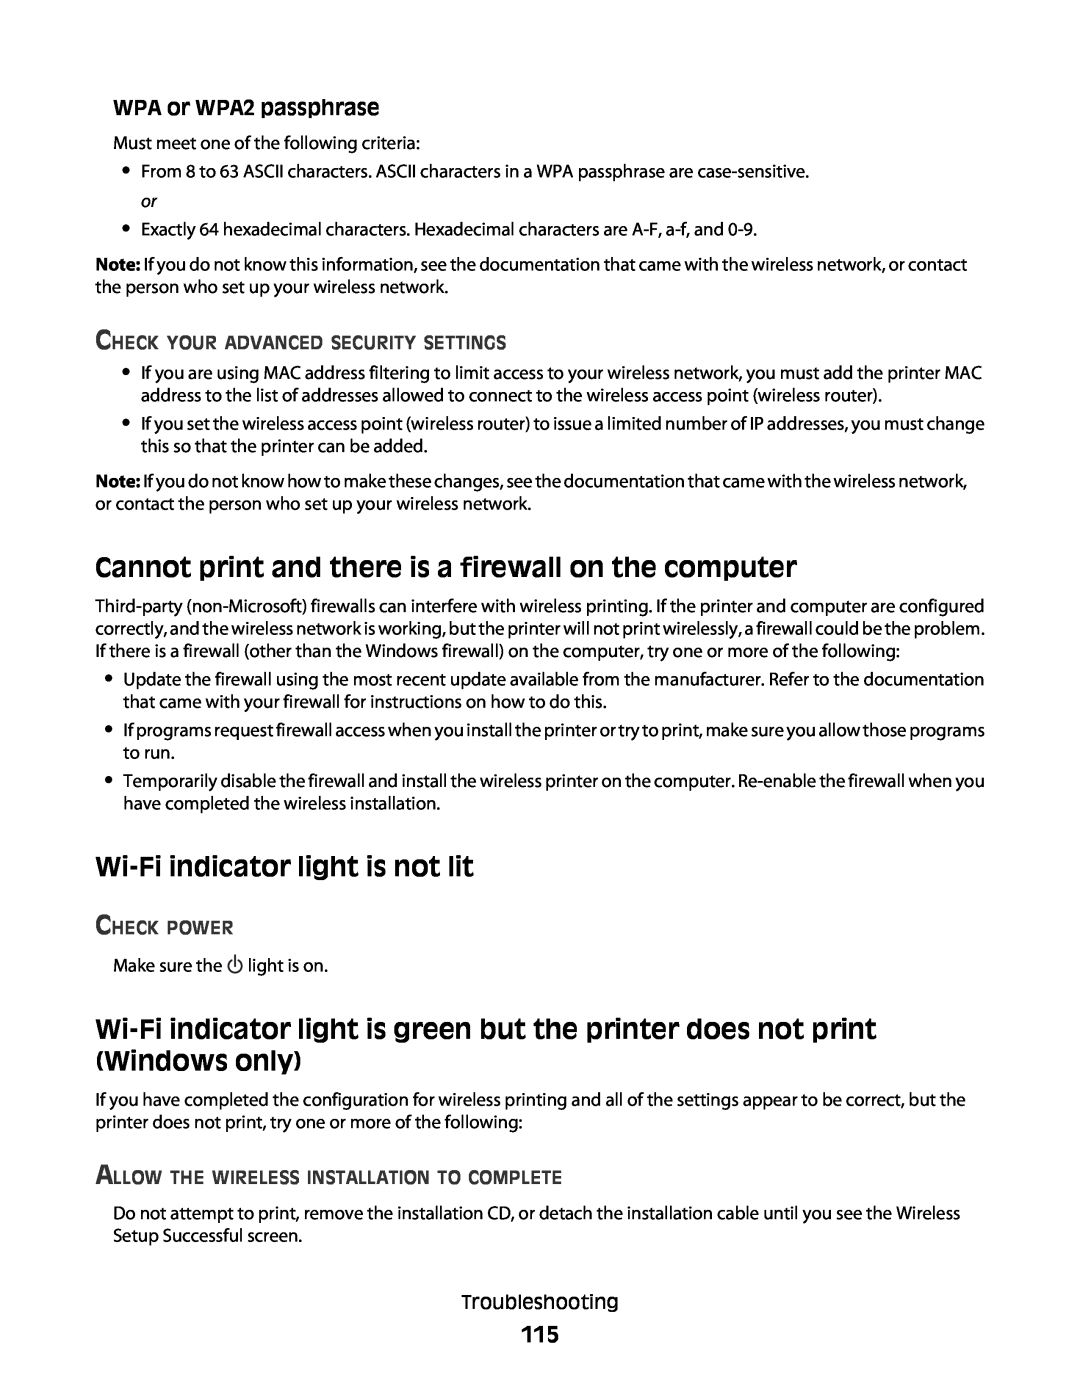 Lexmark 3600, 4600 Cannot print and there is a firewall on the computer, Wi-Fi indicator light is not lit, Check Power 